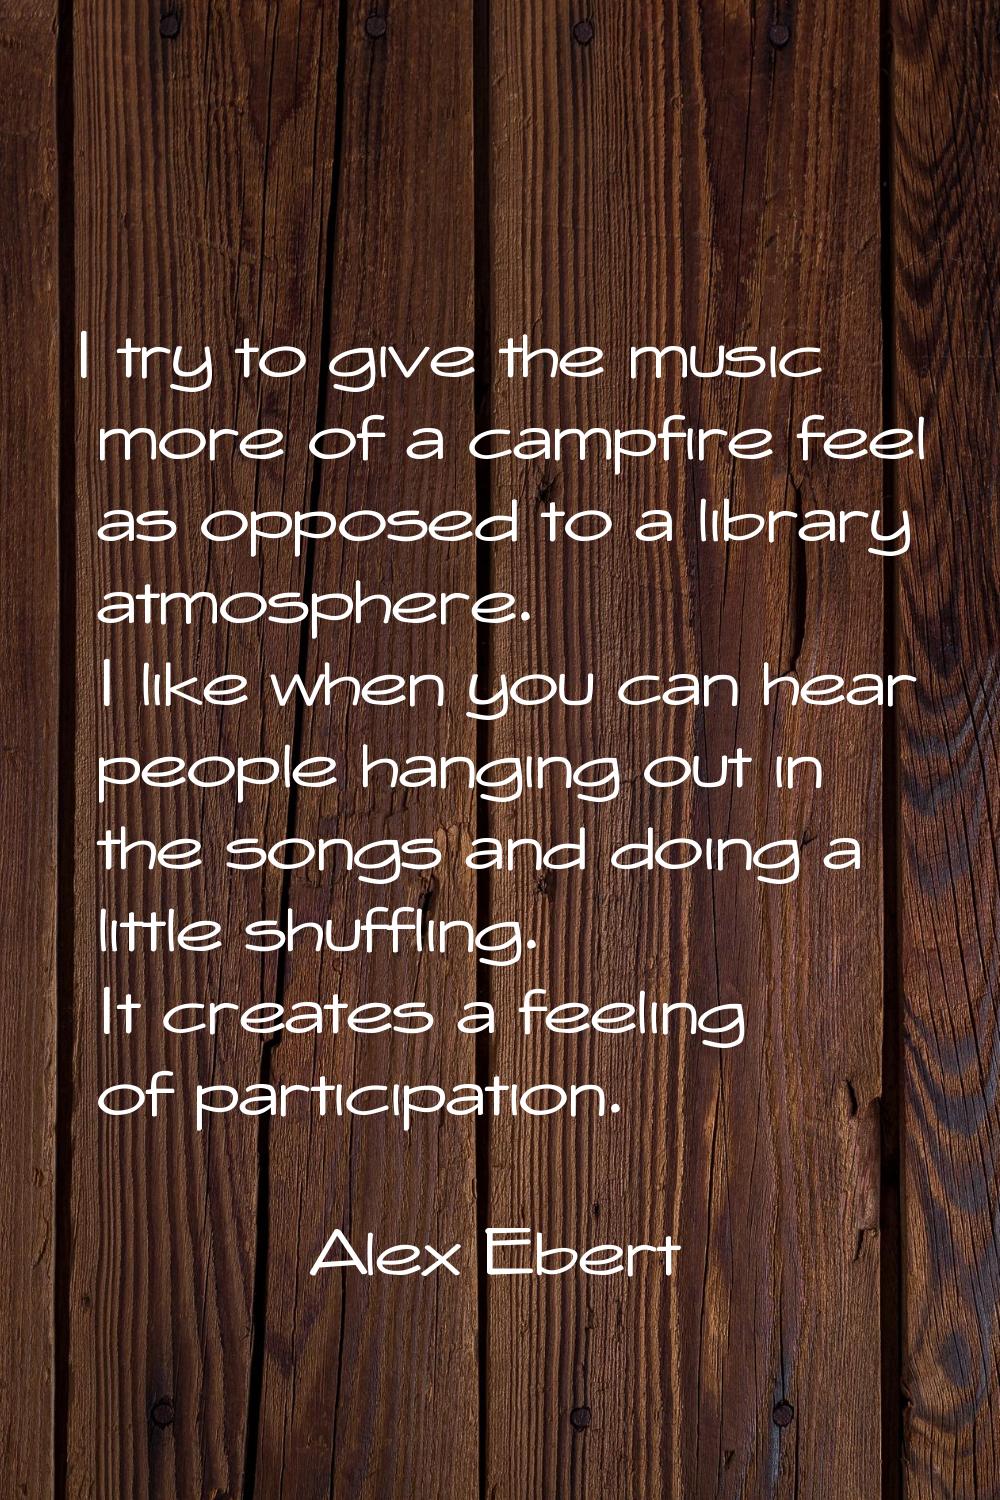 I try to give the music more of a campfire feel as opposed to a library atmosphere. I like when you